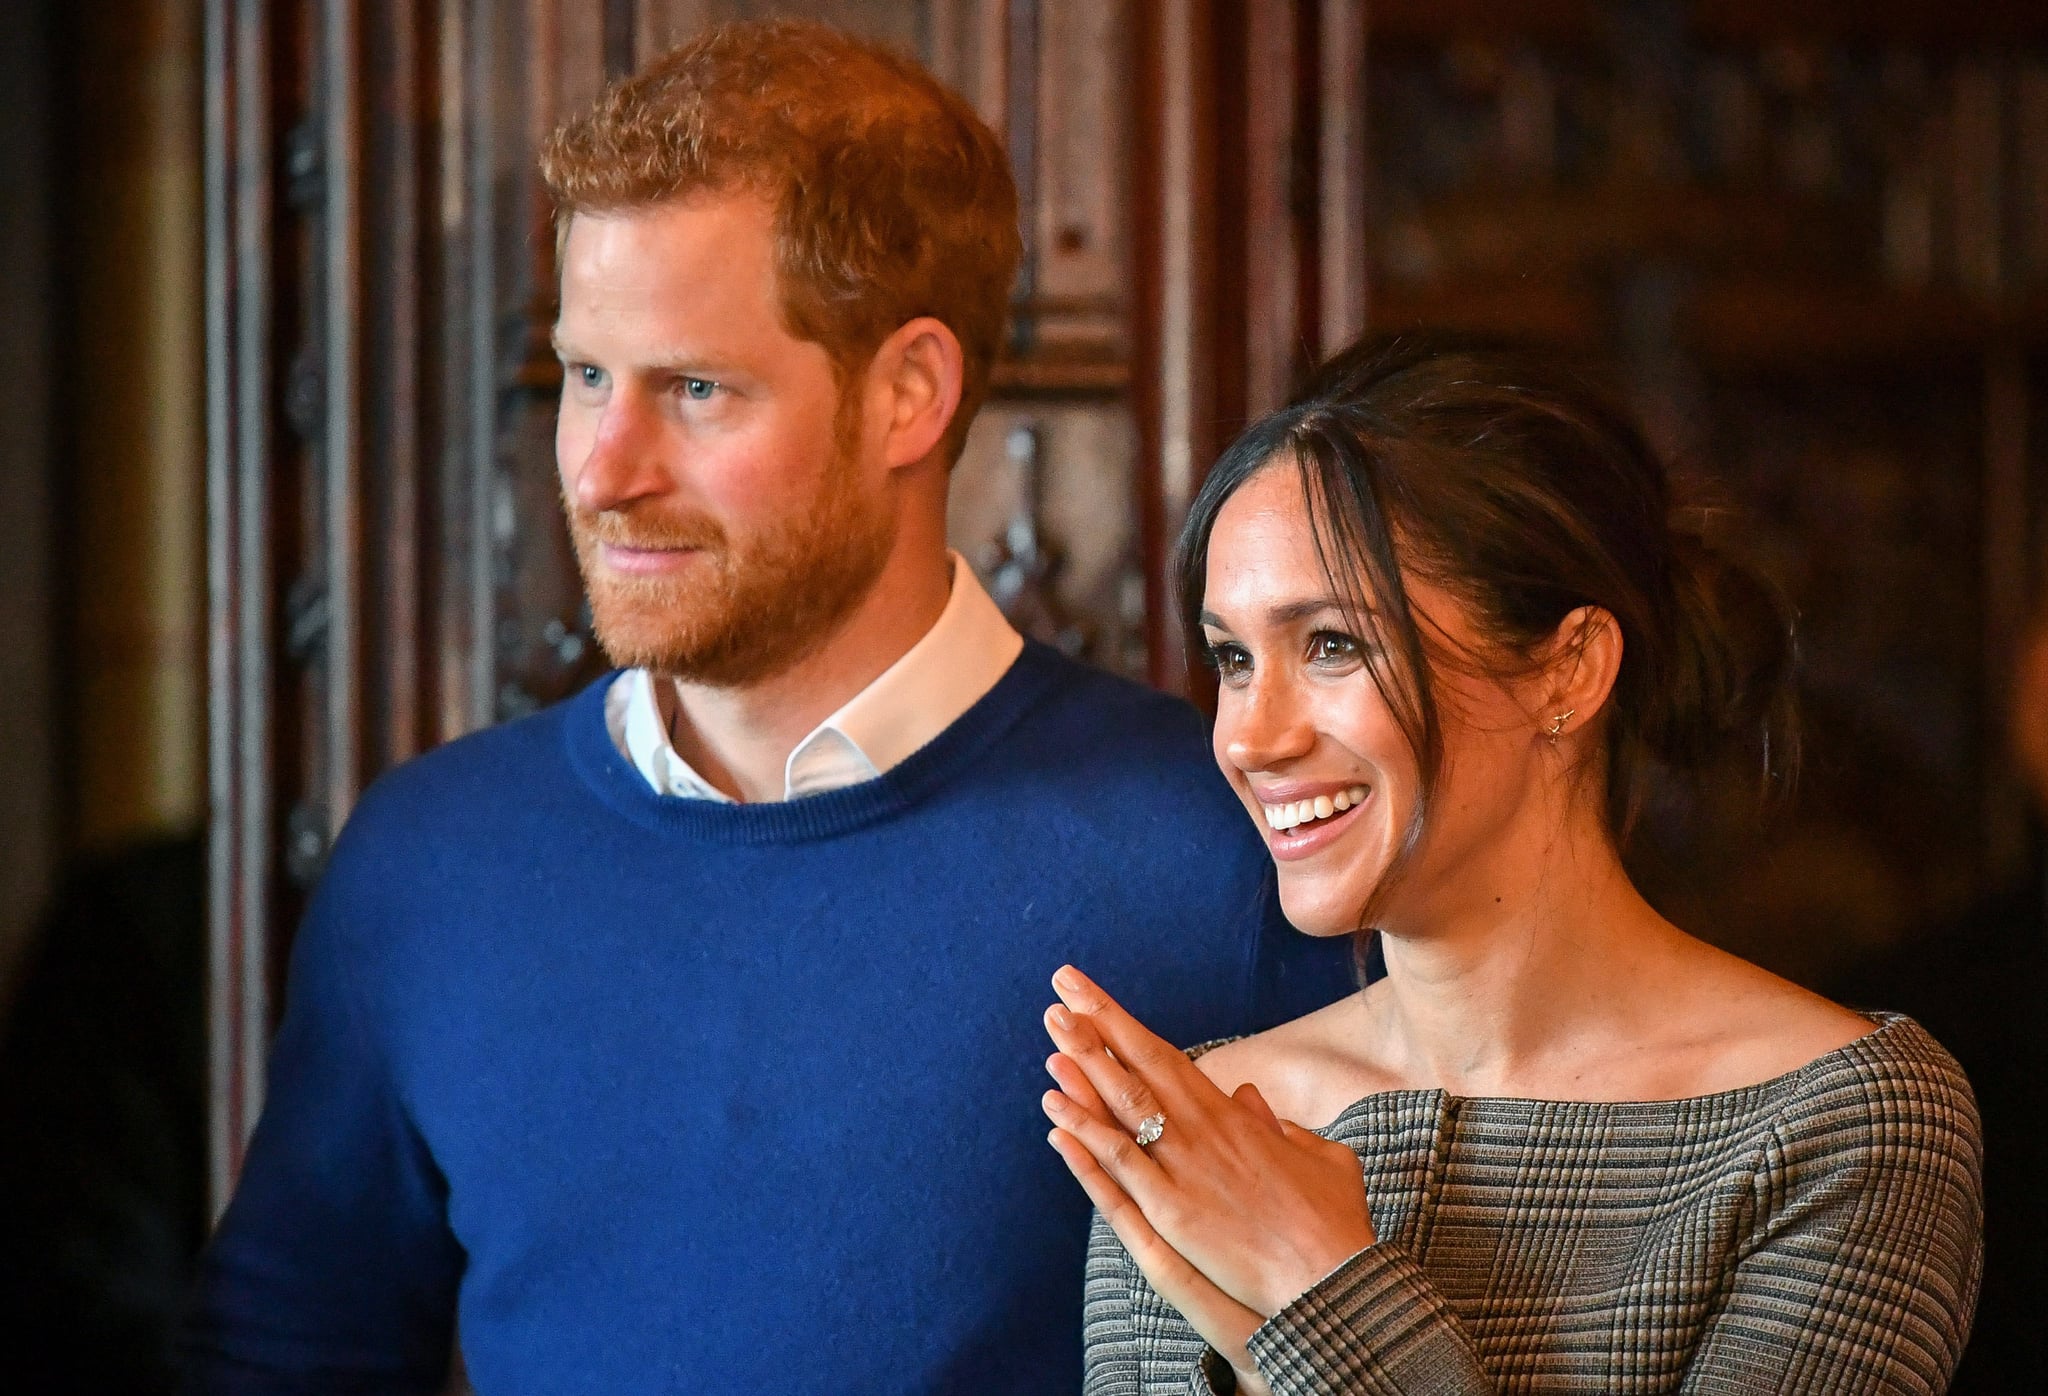 CARDIFF, WALES - JANUARY 18:  Prince Harry and Meghan Markle watch a performance by a Welsh choir in the banqueting hall during a visit to Cardiff Castle on January 18, 2018 in Cardiff, Wales. (Photo by Ben Birchall - WPA Pool / Getty Images)